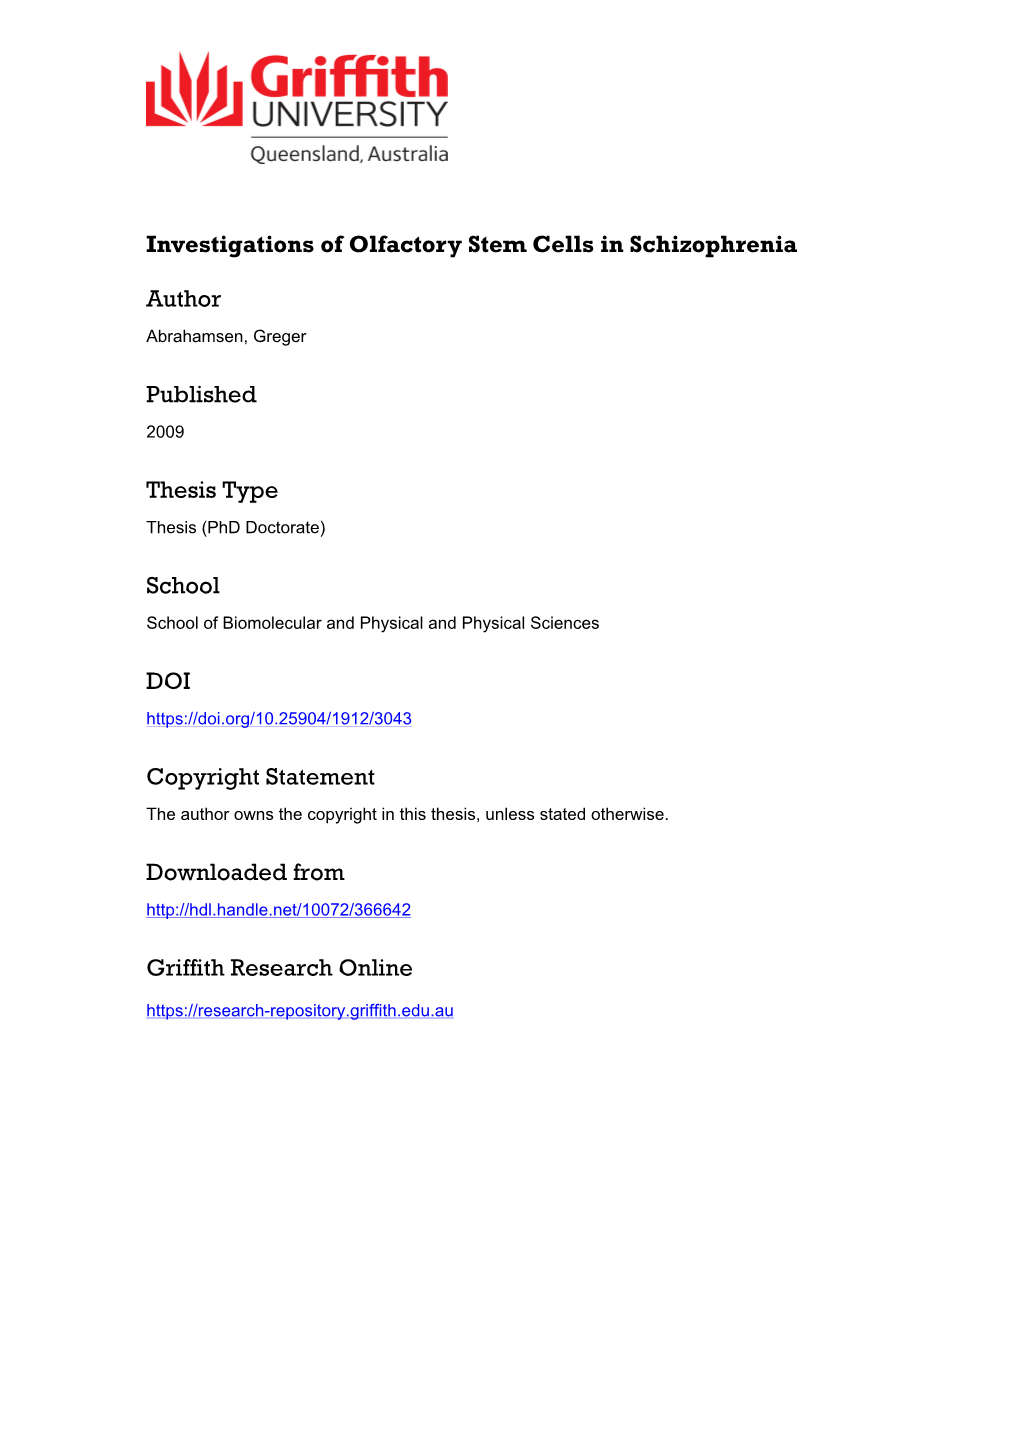 Investigations of Olfactory Stem Cells As a Model for Schizophrenia